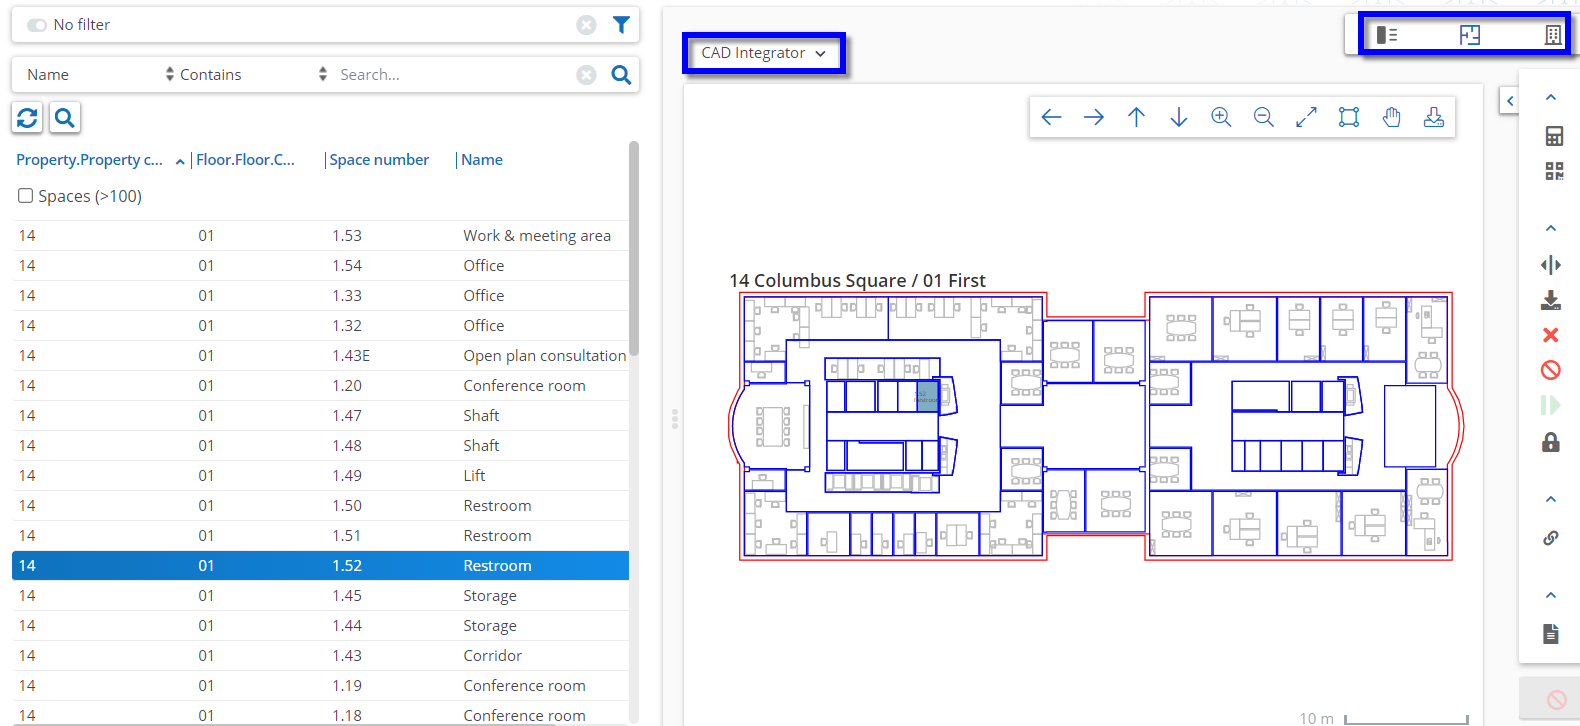 Screen capture showing the CAD Integrator view of the selected property